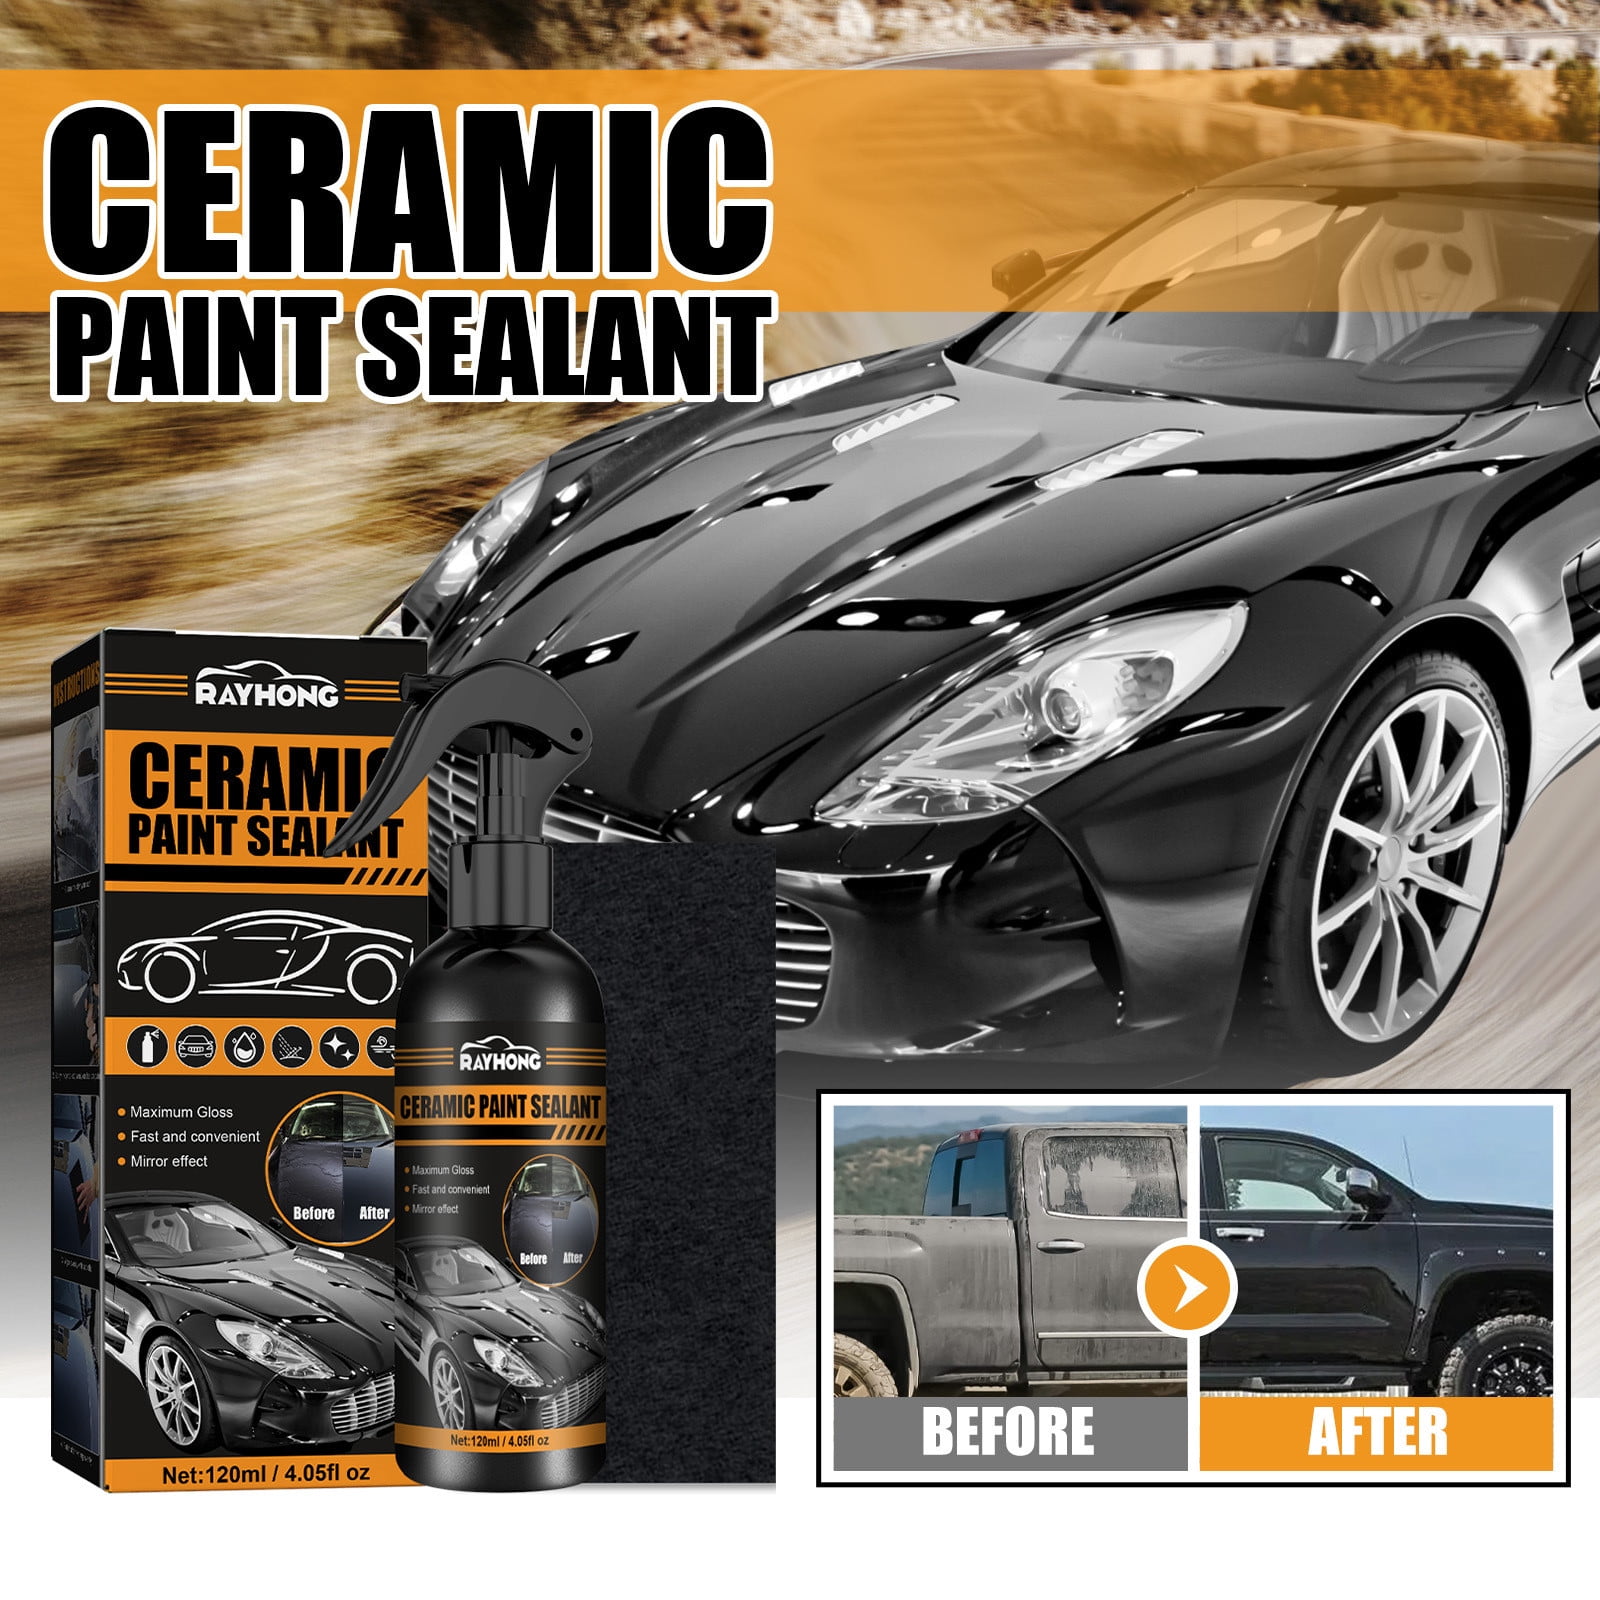 3 In 1 Quick Coating Spray High Protection Ceramic Car Wash Car Coating  Cleaning Nano Polishing Paint Wax - Cleaning Agent / Curing Agent -  AliExpress